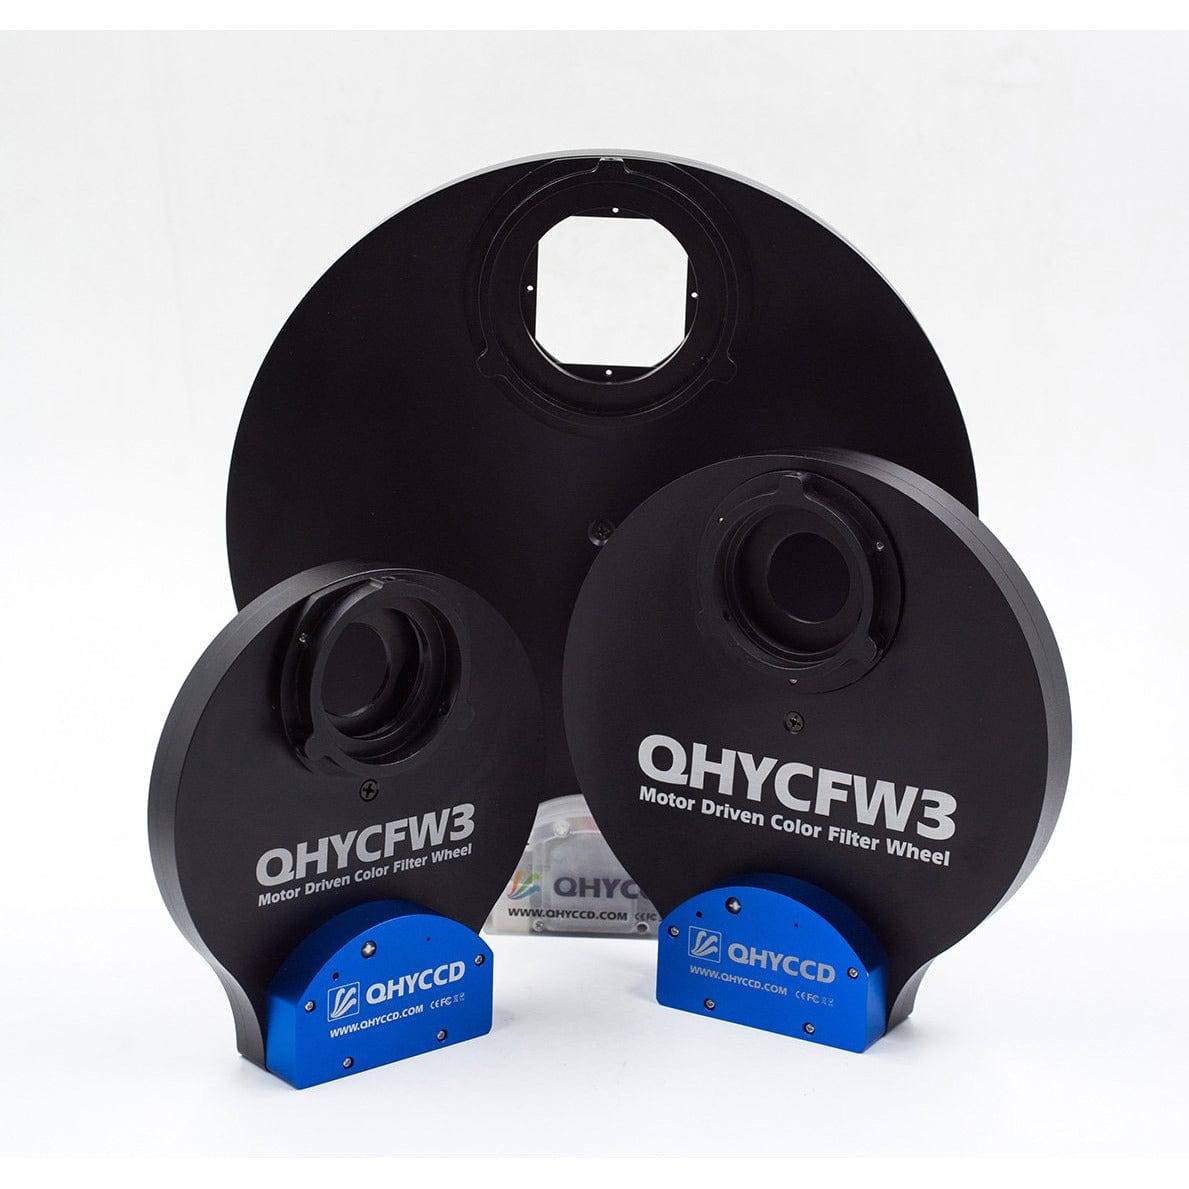 QHYCCD Filter Wheel QHYCCD QHYCFW3M-US 3rd Generation Medium Thin Version Filter Wheel - 5 x 2" (or 50mm Unmounted) and 7 x 36mm Filter Versions